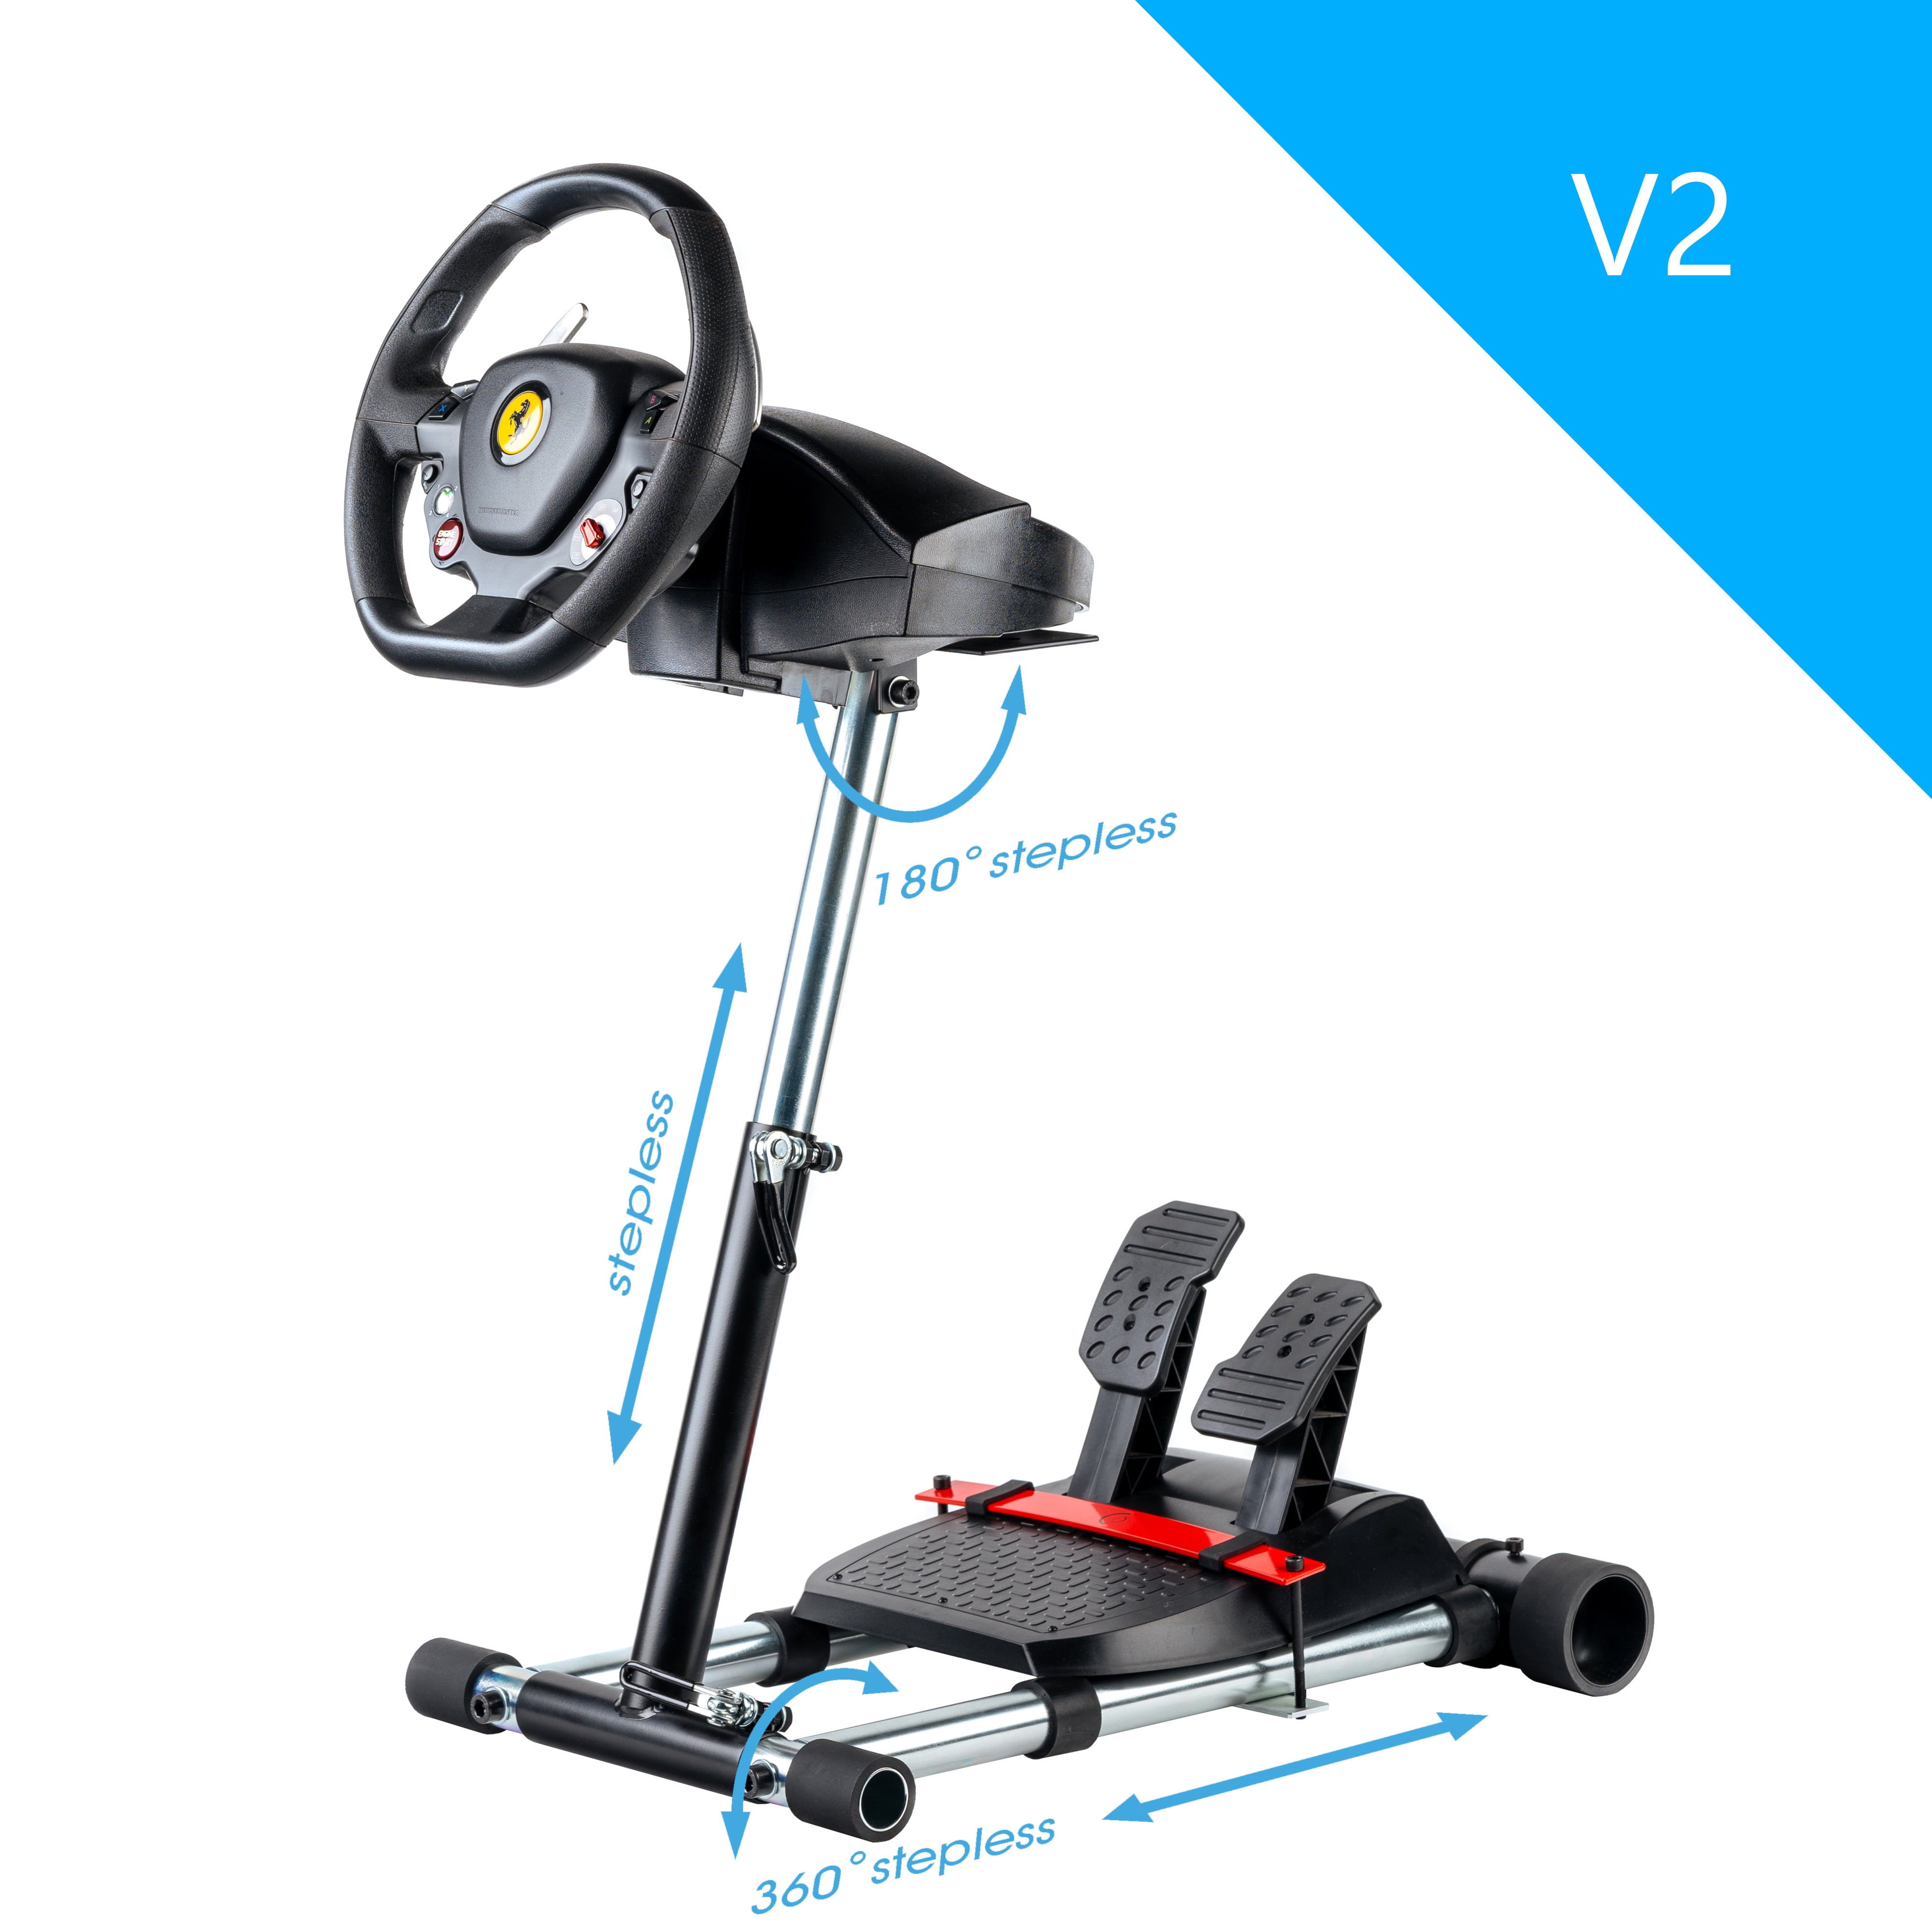 lufthavn To grader Håndskrift Wheel Stand Pro F458 Racing Wheelstand Compatible With Thrustmaster 458 (Xbox  360 Version), F458 Spider (Xbox One), T80, T100, RGT, Ferrari GT and F430;  Original V2 Stand: Wheel/Pedals Not included - Walmart.com